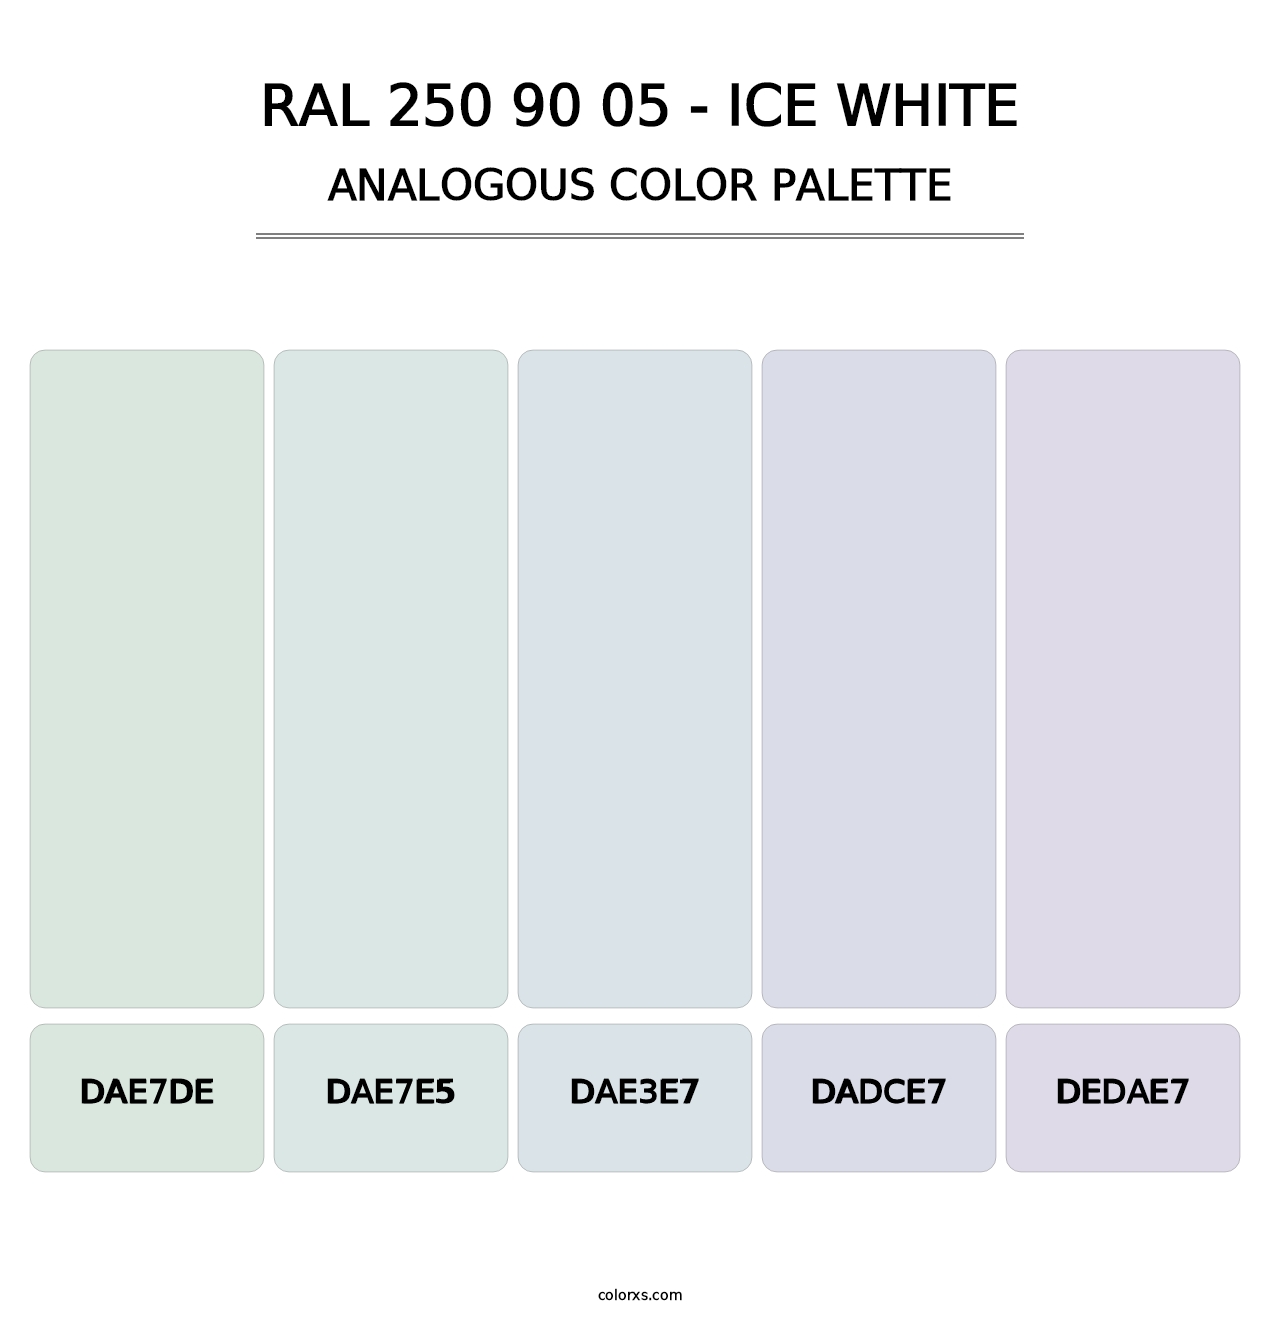 RAL 250 90 05 - Ice White - Analogous Color Palette